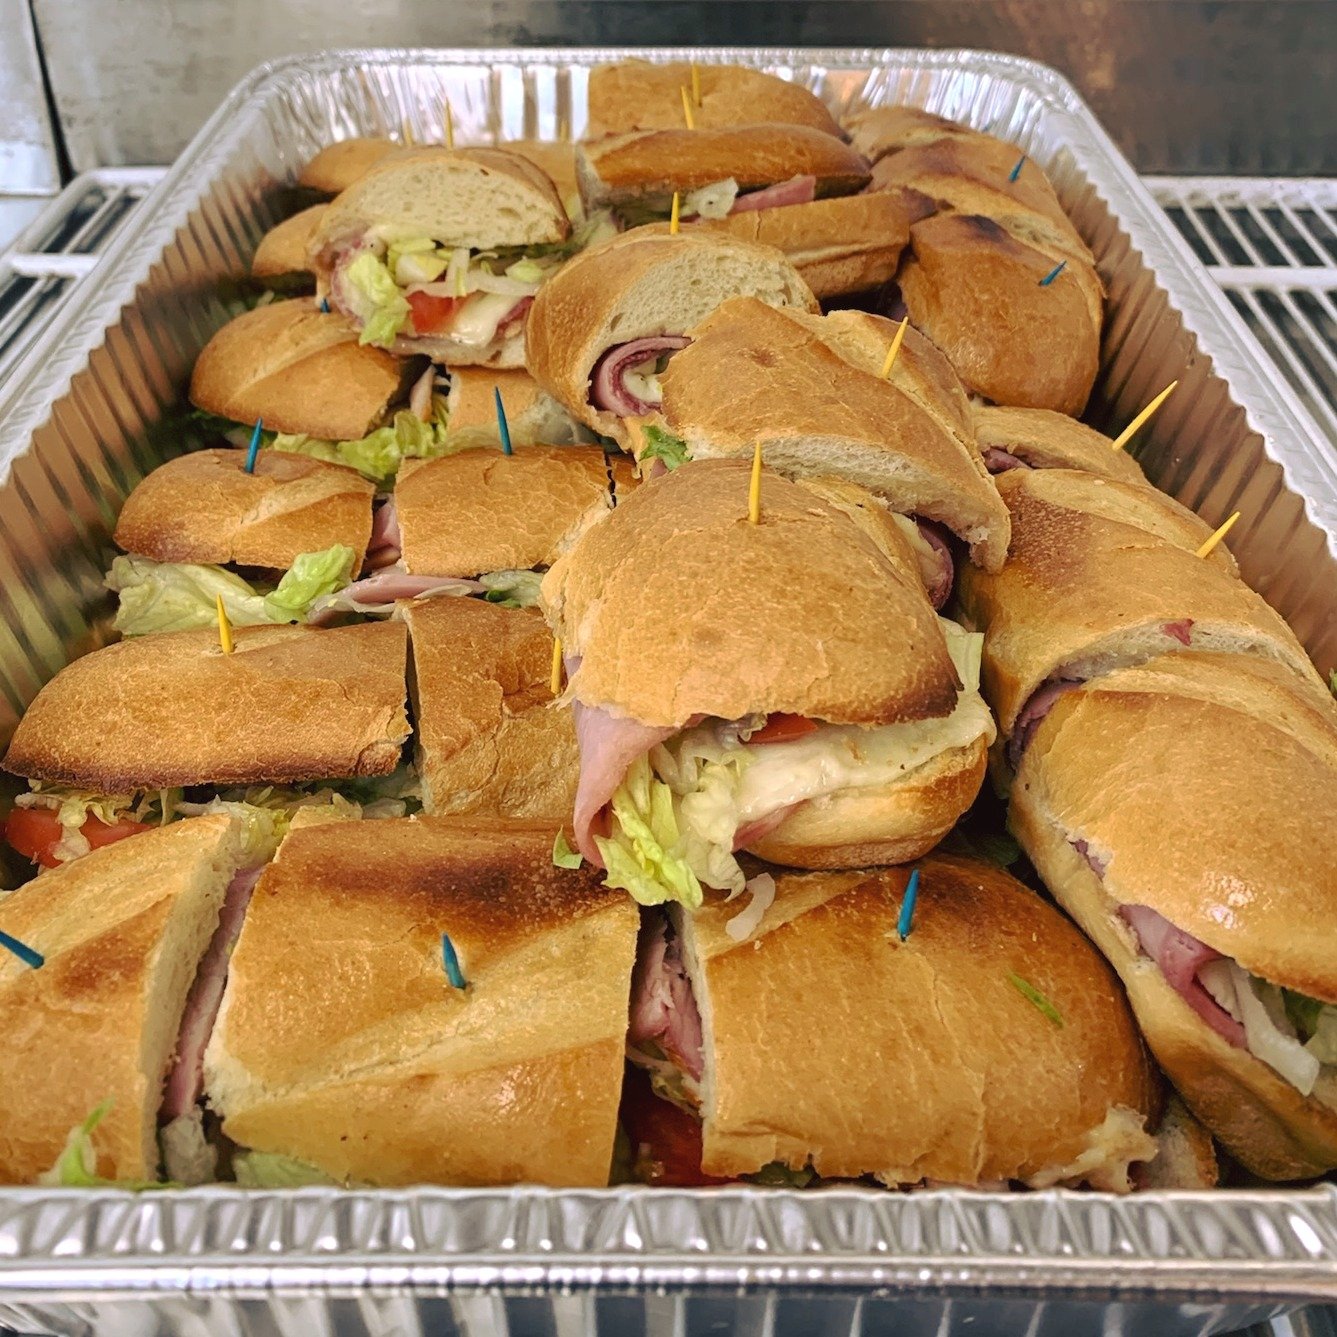 The sub platter: all the benefits of a five-foot sub without having to figure out where to put a five-foot sub 😅❤️✨

(we also sell five-foot subs 😂) 

#northvillemichigan #pizza #northvillemi #supportsmallbusiness #eatlocal #supportlocalbusiness #s